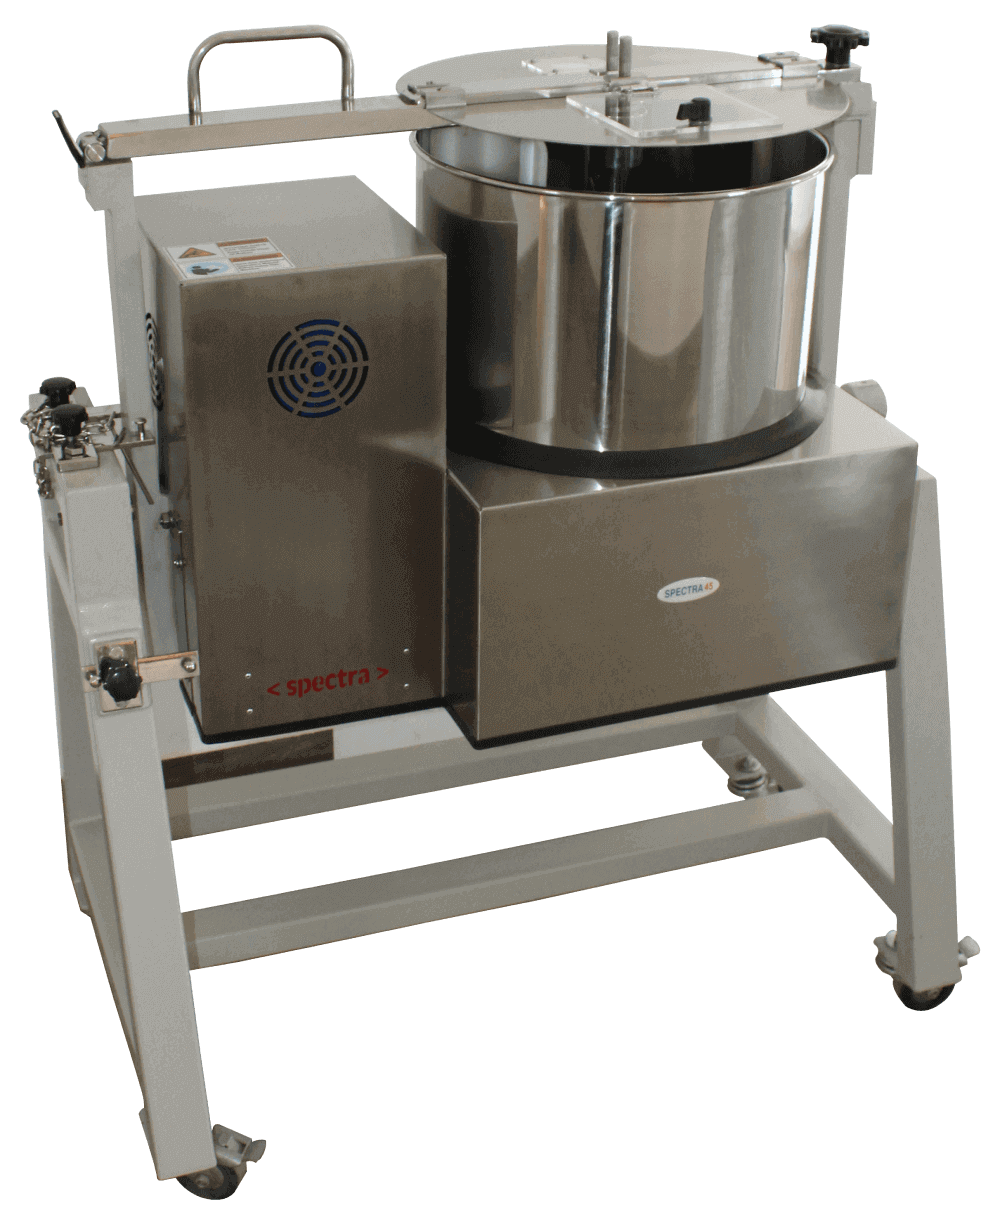 Santha 20 Chocolate Melanger with Speed Controller